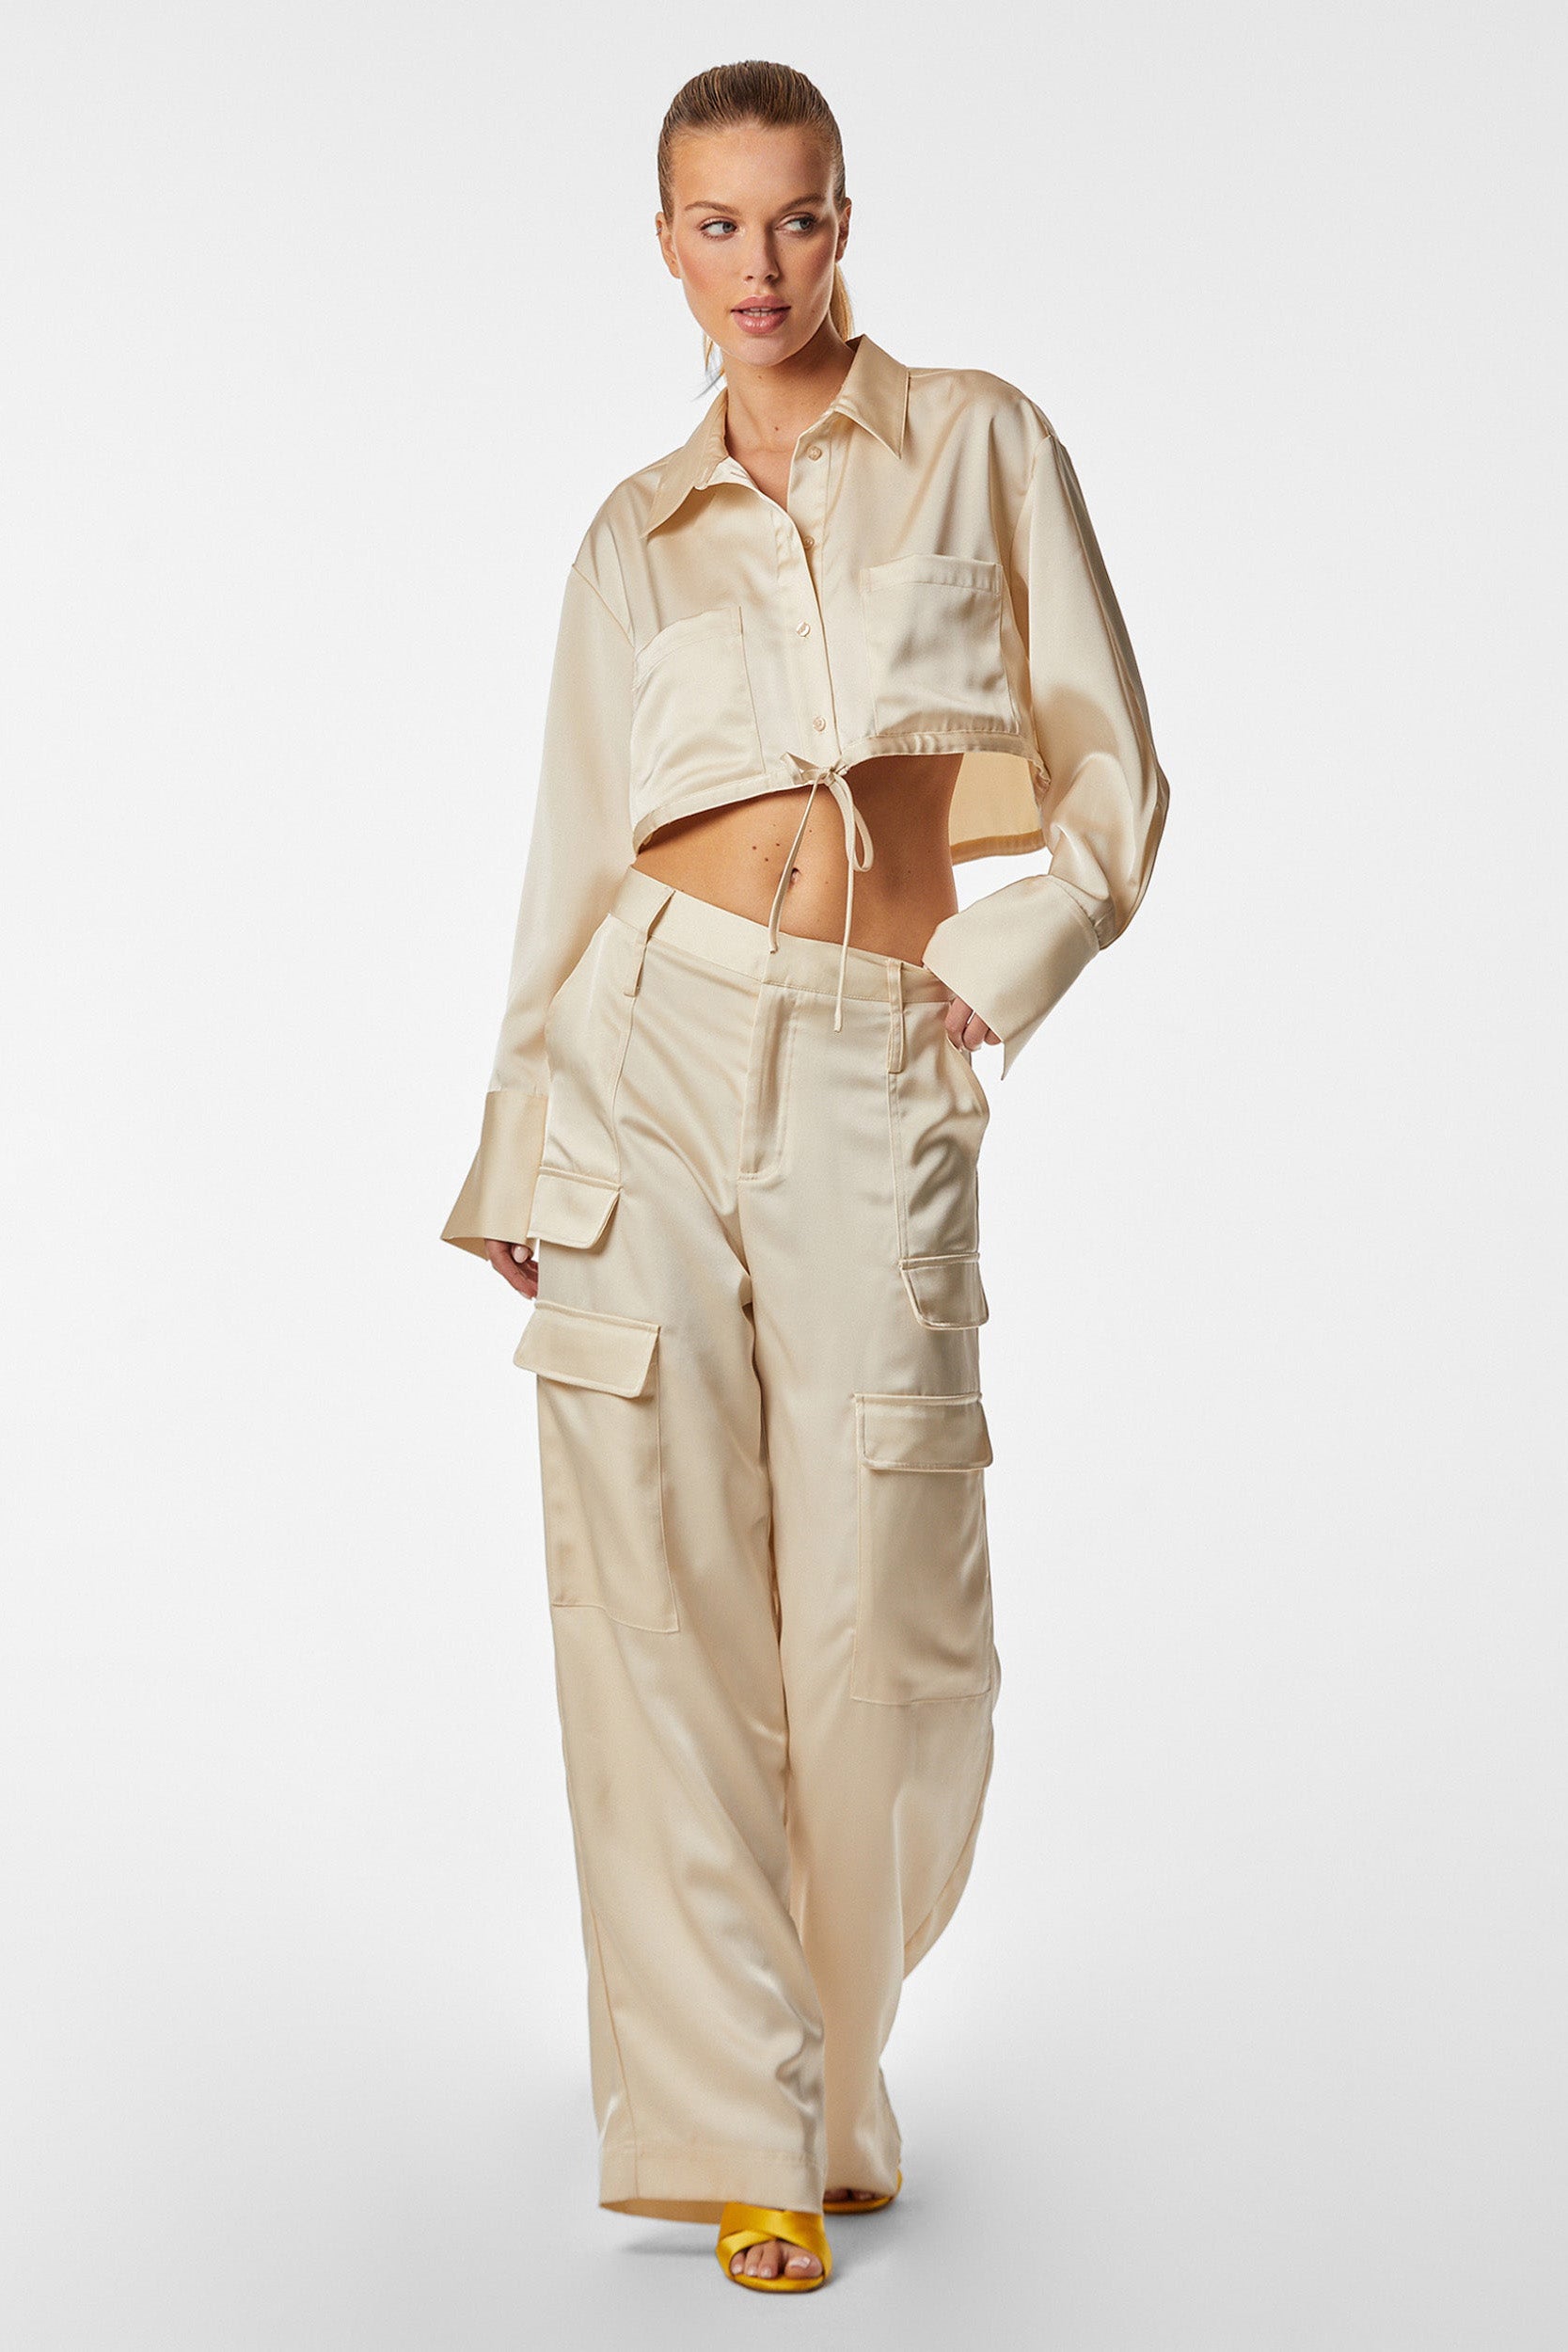 A woman models a stylish outfit featuring a cropped Pearl Milan Satin Button Up shirt tied at the waist and matching wide-leg cargo pants with multiple pockets. She wears yellow open-toe sandals and stands against a plain white background.